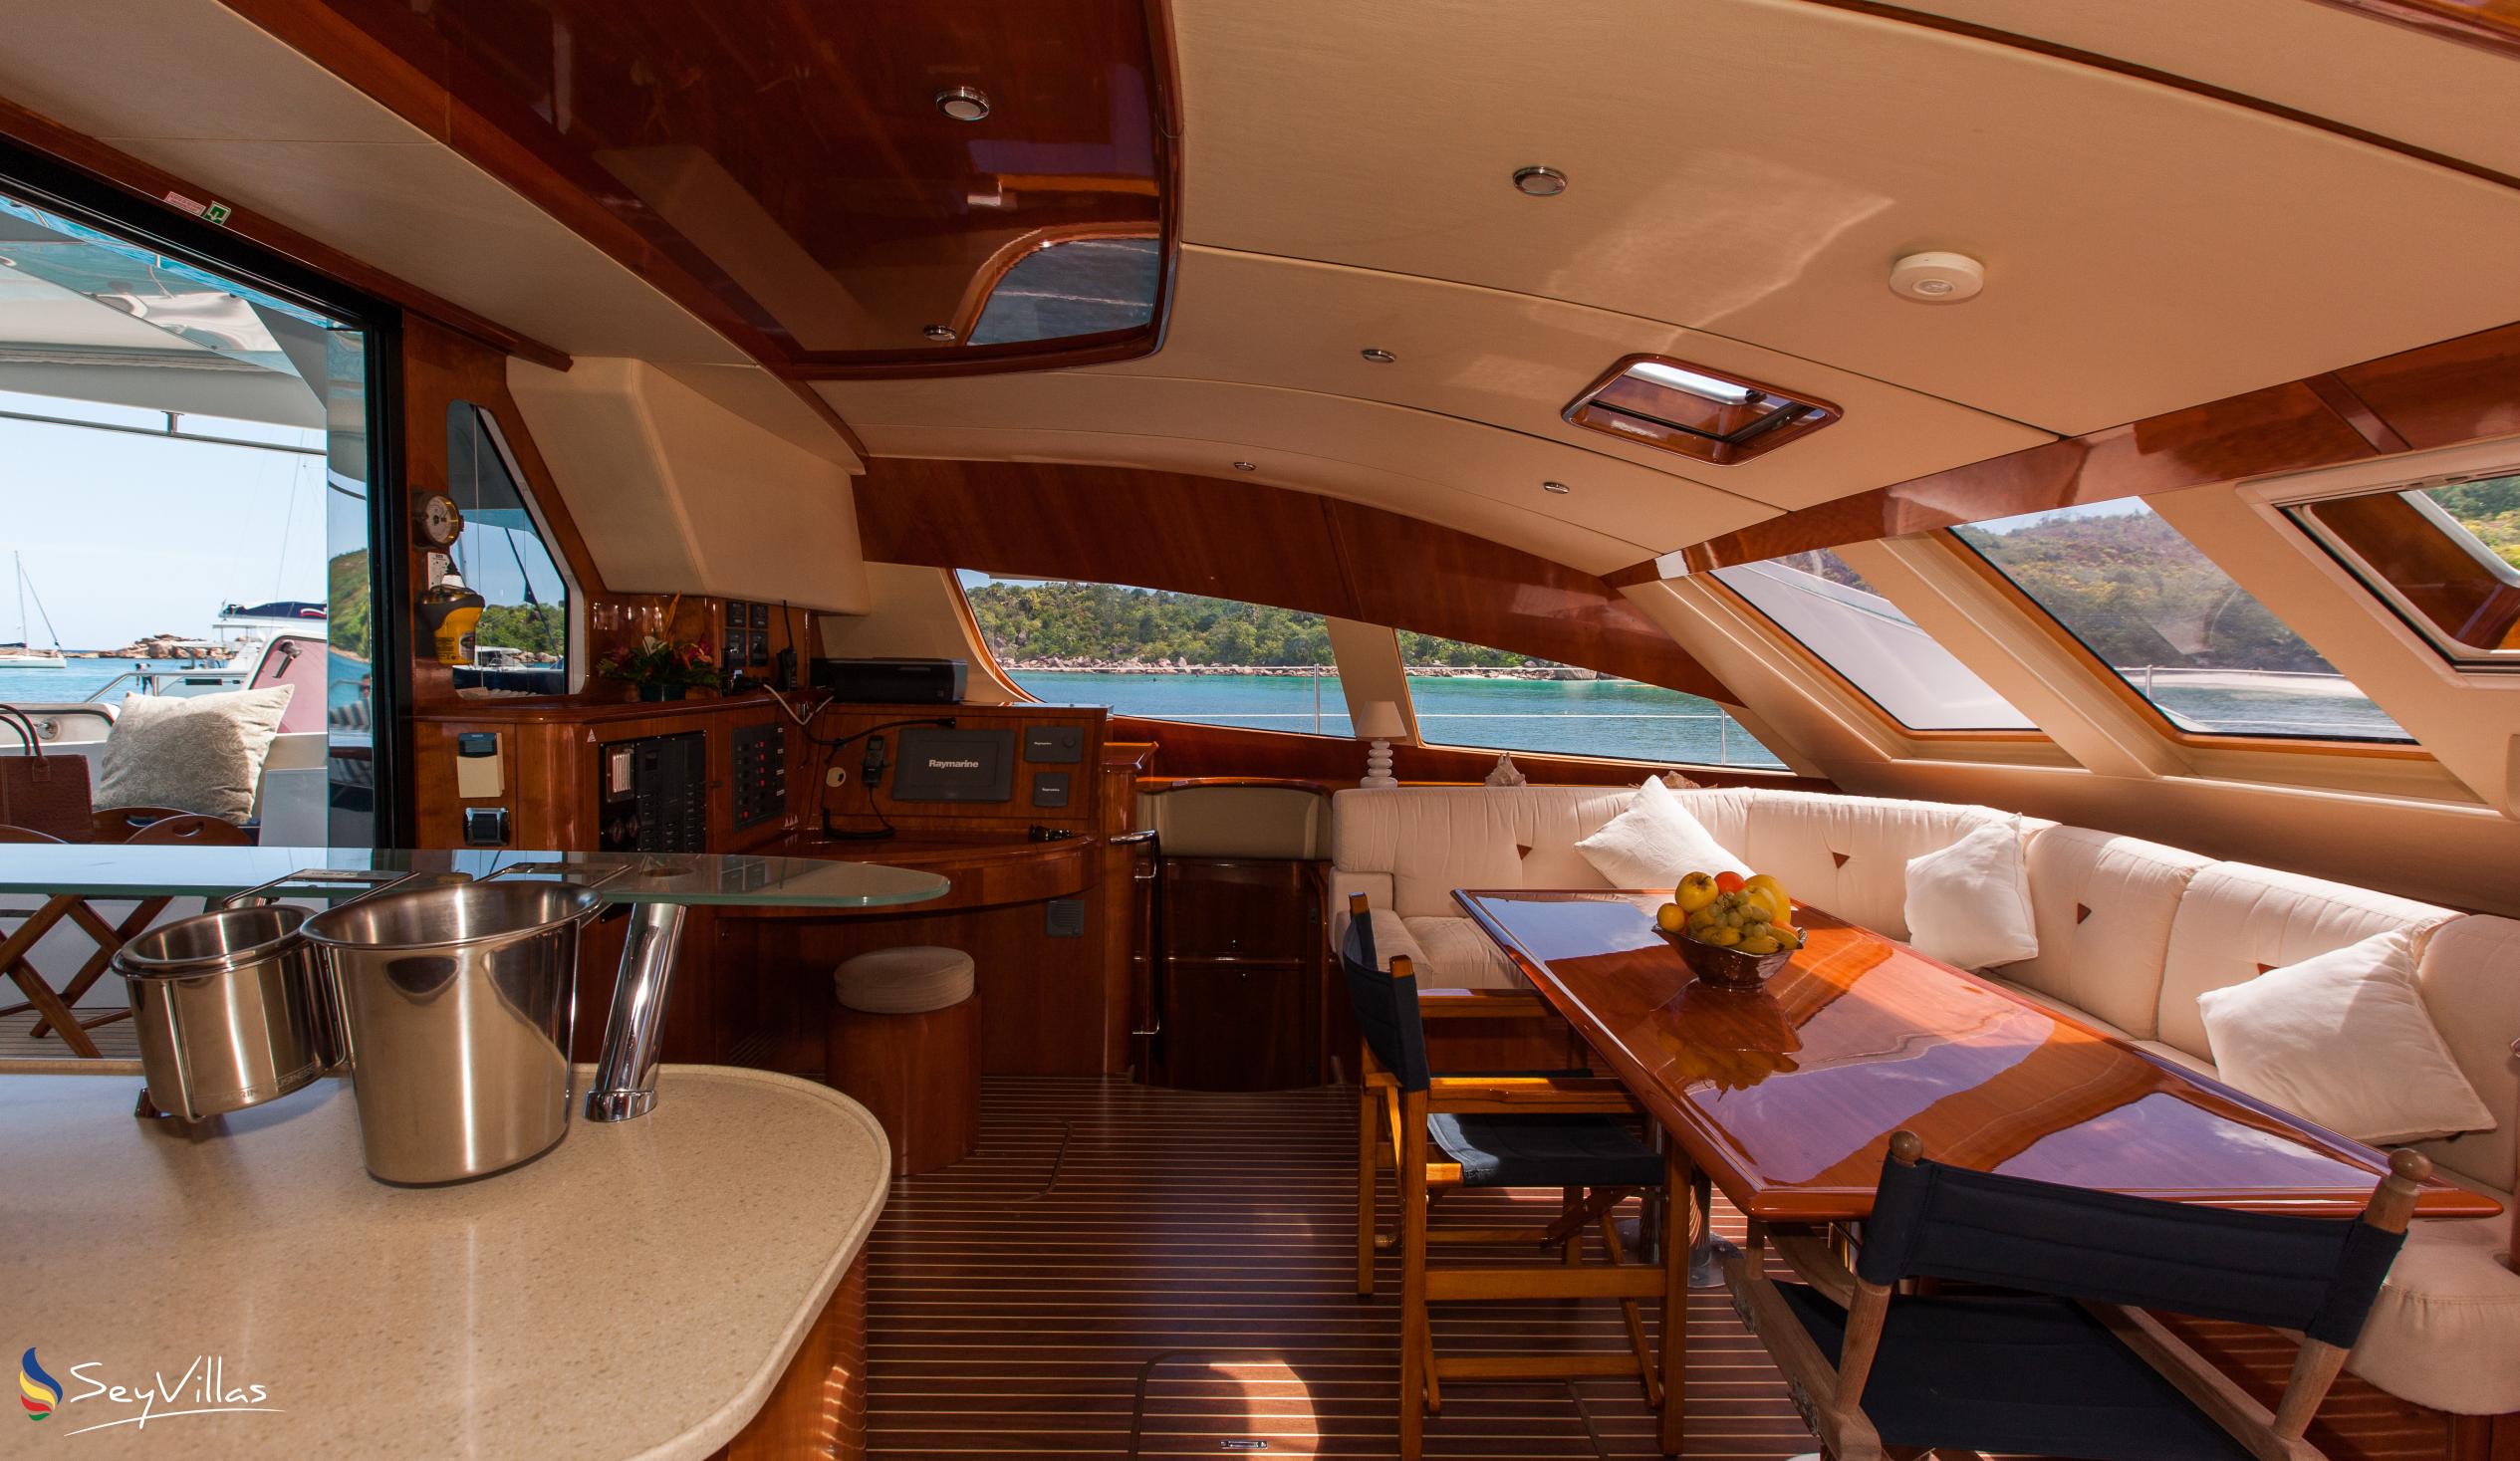 Foto 85: Seyscapes Yacht Charter - Charter completo Cirrus - Seychelles (Seychelles)